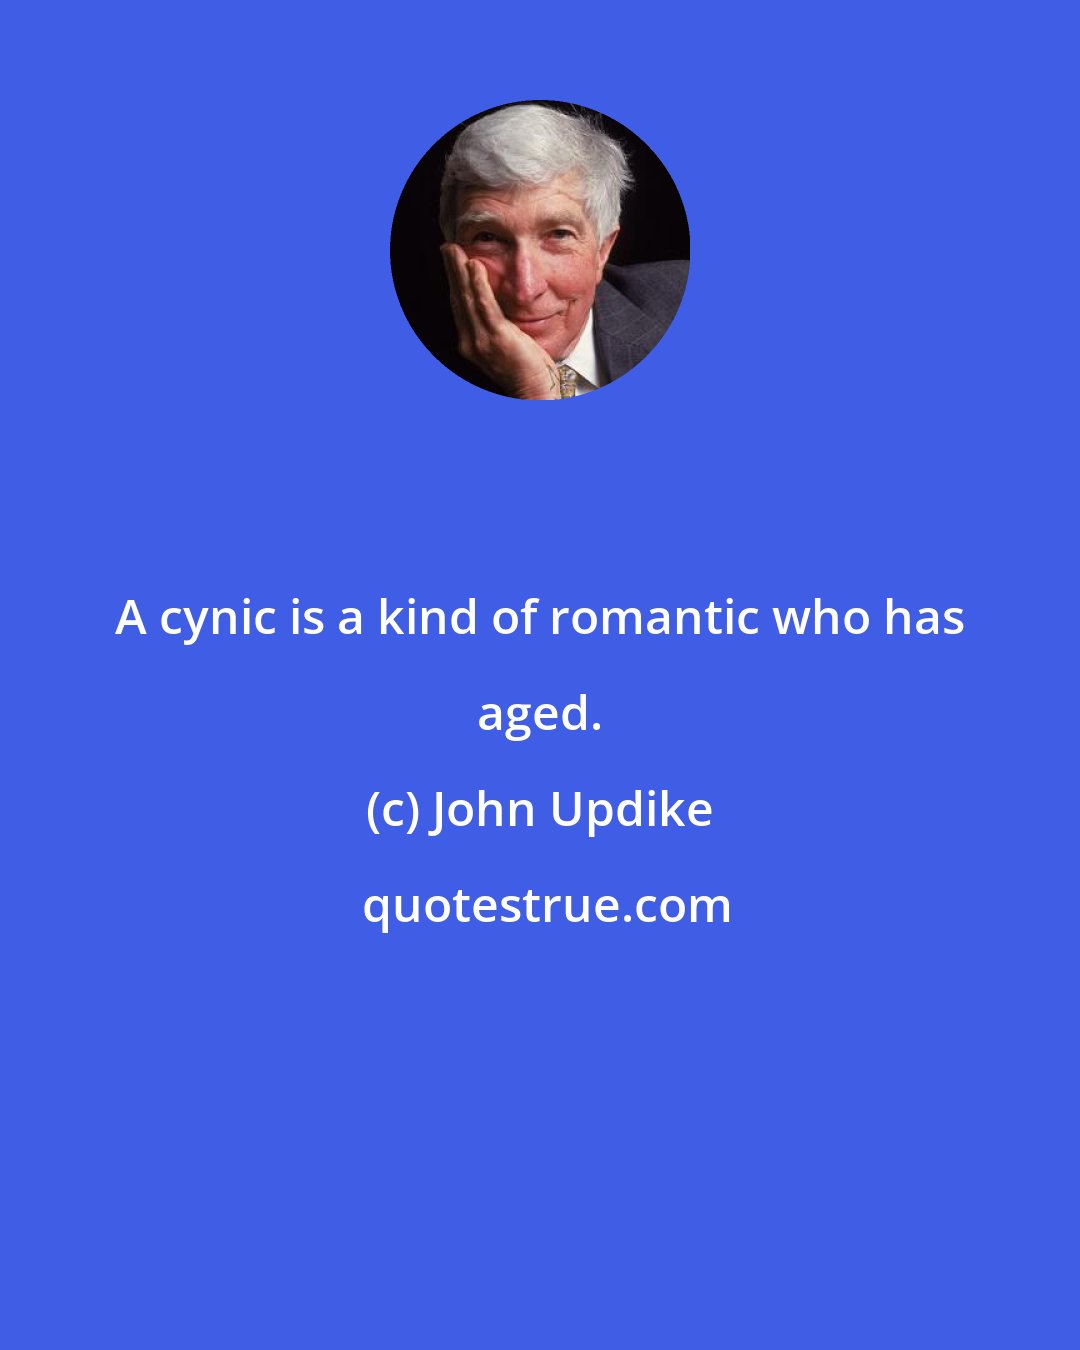 John Updike: A cynic is a kind of romantic who has aged.